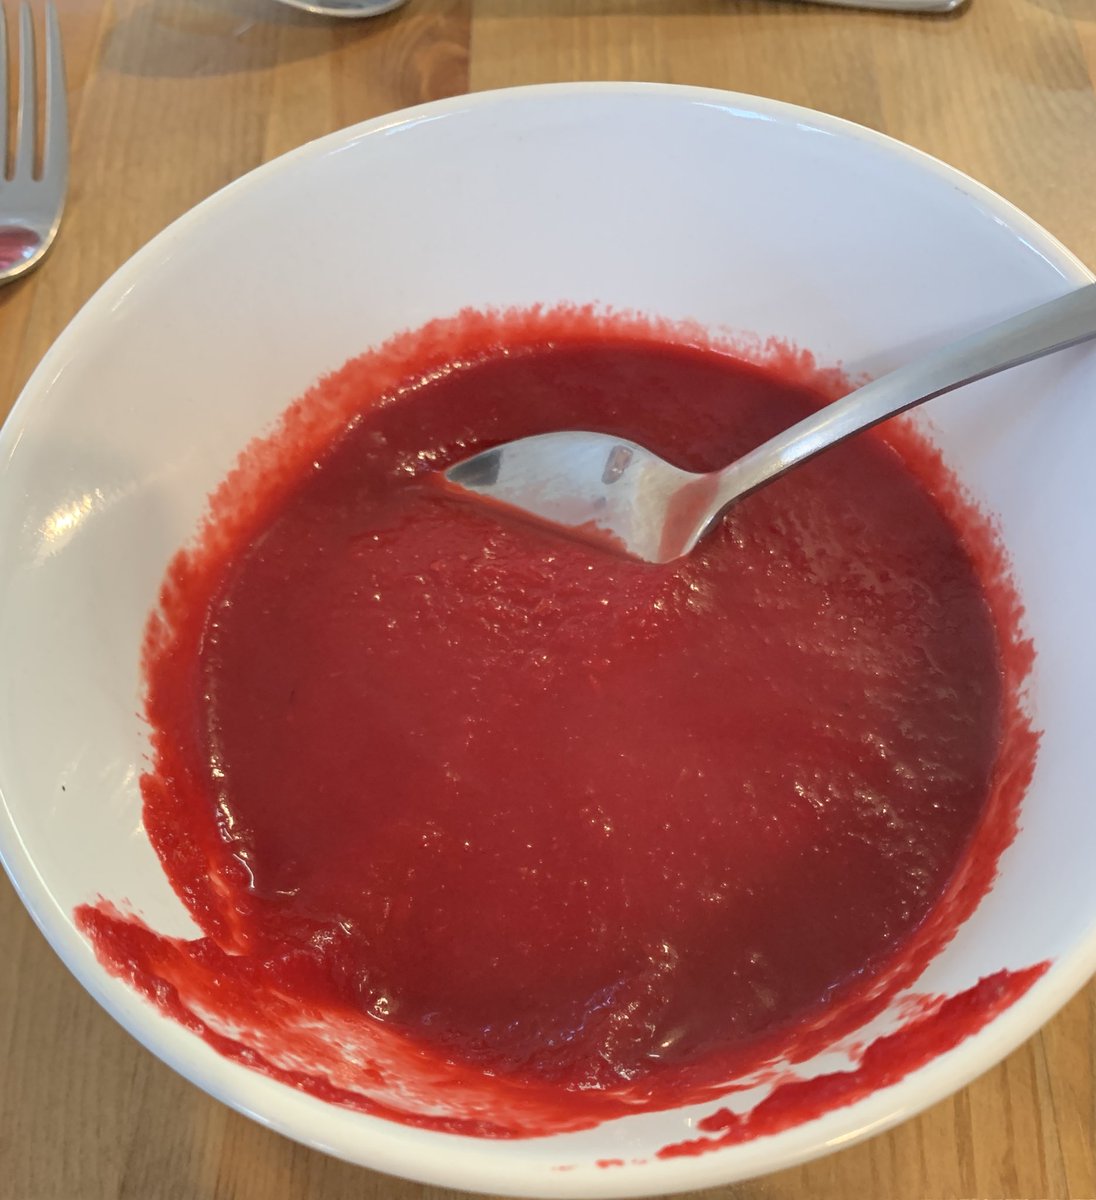 Yummy Auntie Pamela’s #beetroot #soup and my #veteran didn’t even share it with me, harrumph! 

#LynGoldenRetriever
#goldenretriever #goldenretrievers #retriever #retrievers #dog #dogs #goldenretrieverlover #goldenretrieversrule 
#goldenretrieversworld